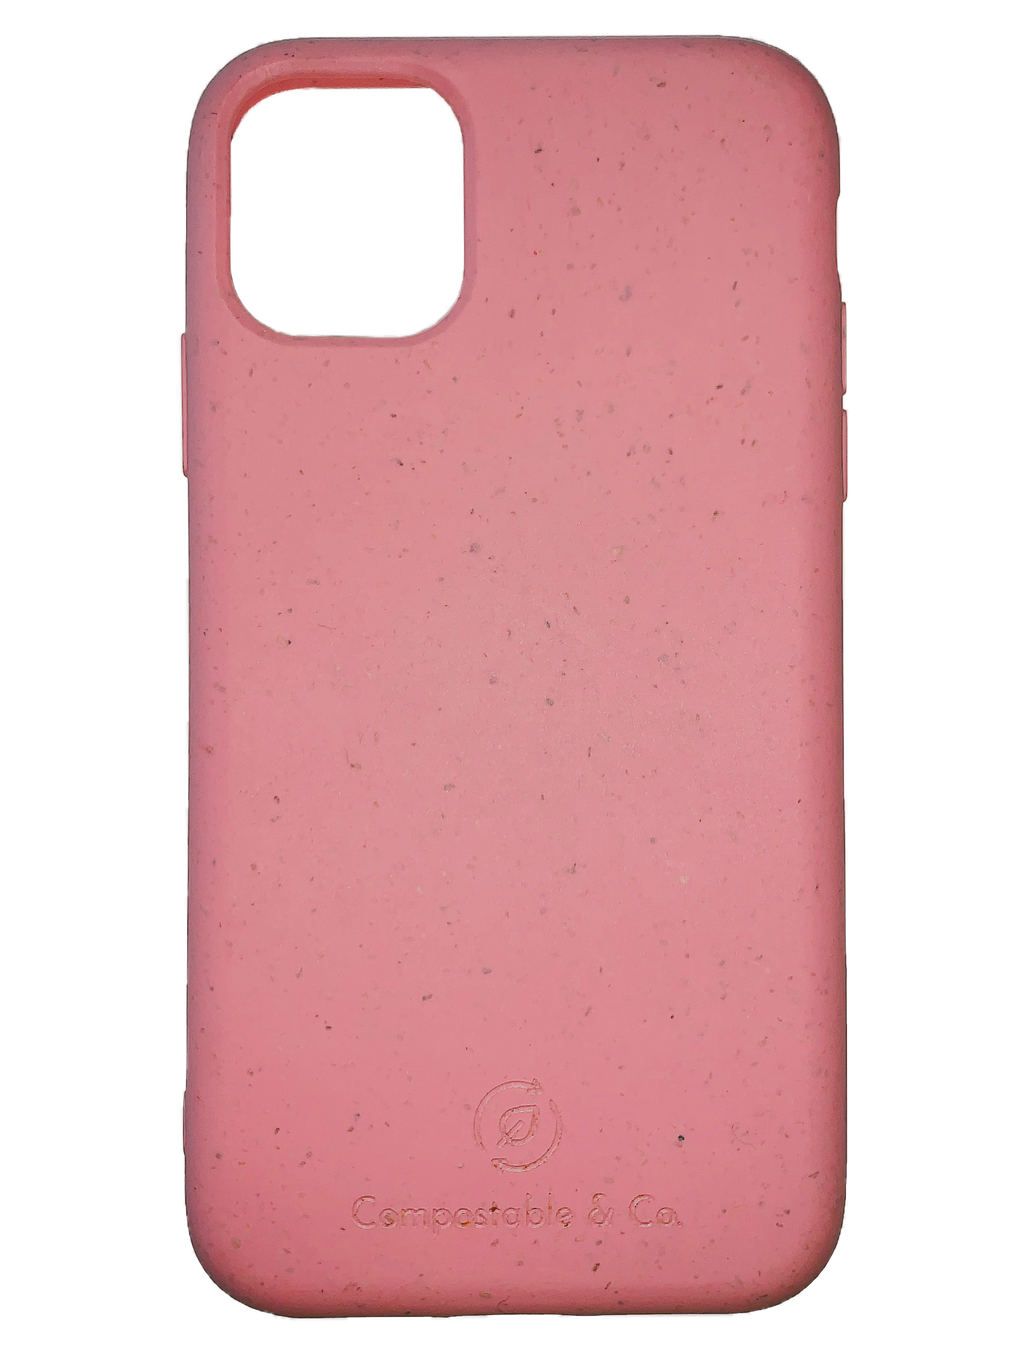 Compostable & Co. iPhone 12 pink biodegradable phone case